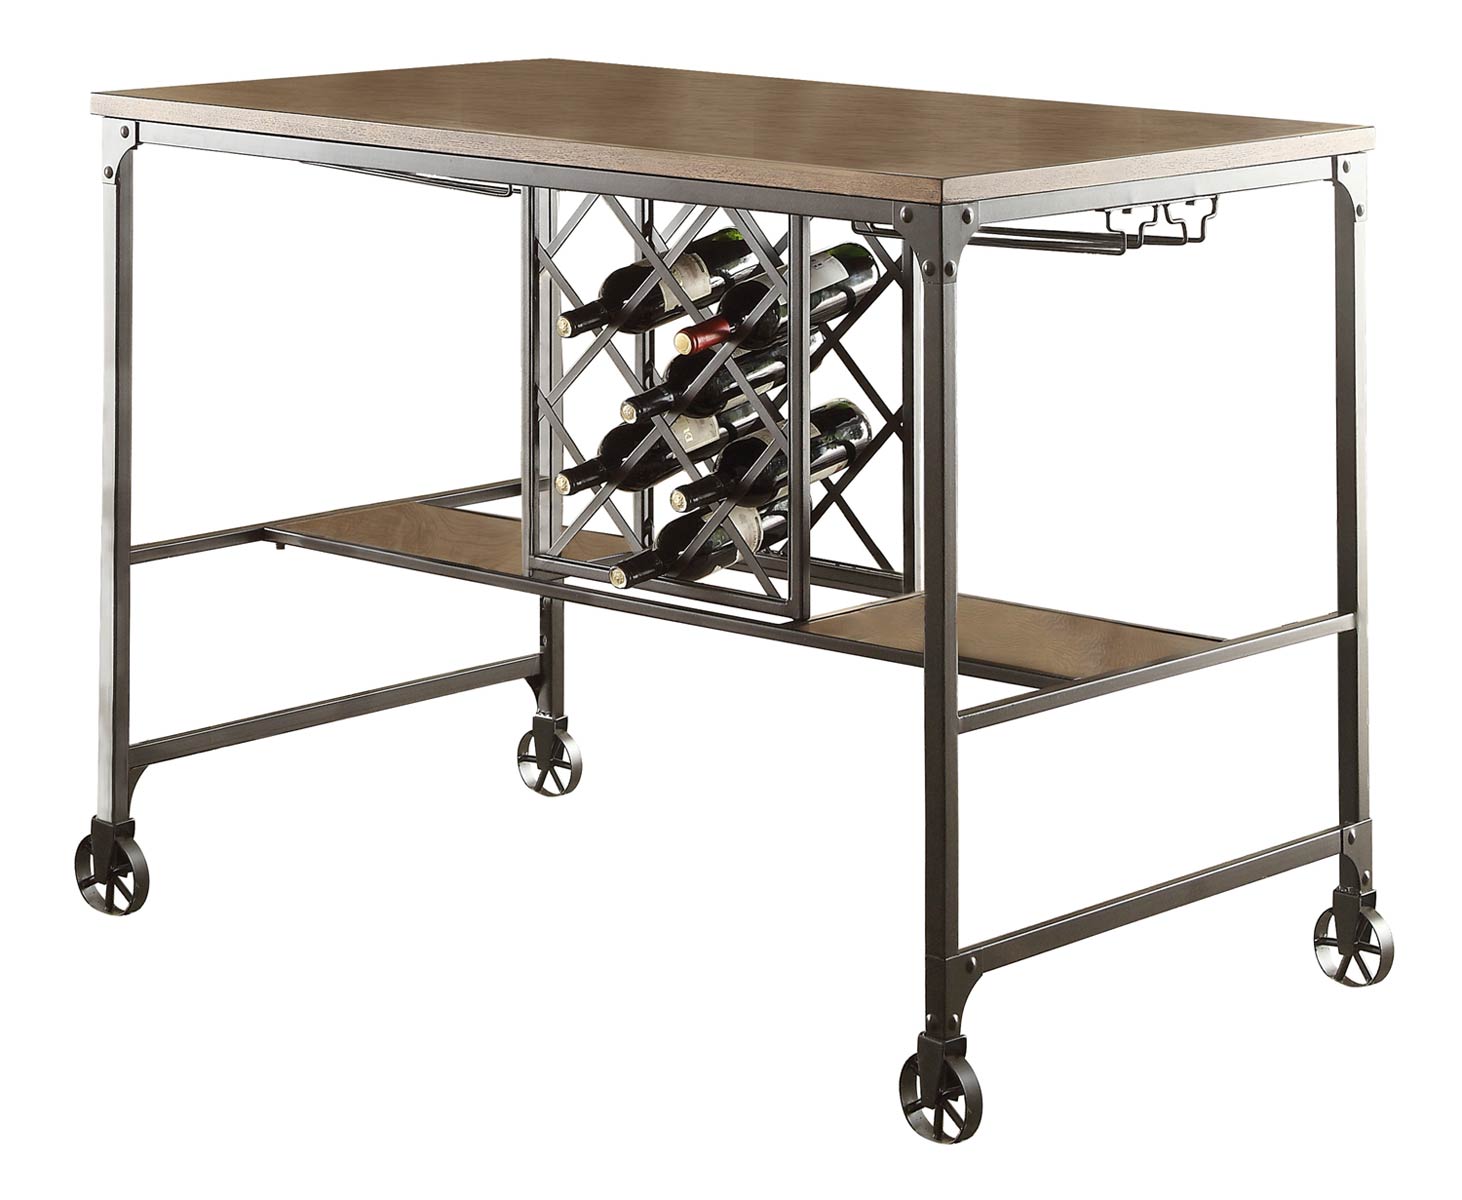 Homelegance Angstrom Counter Height Table with Wine Rack